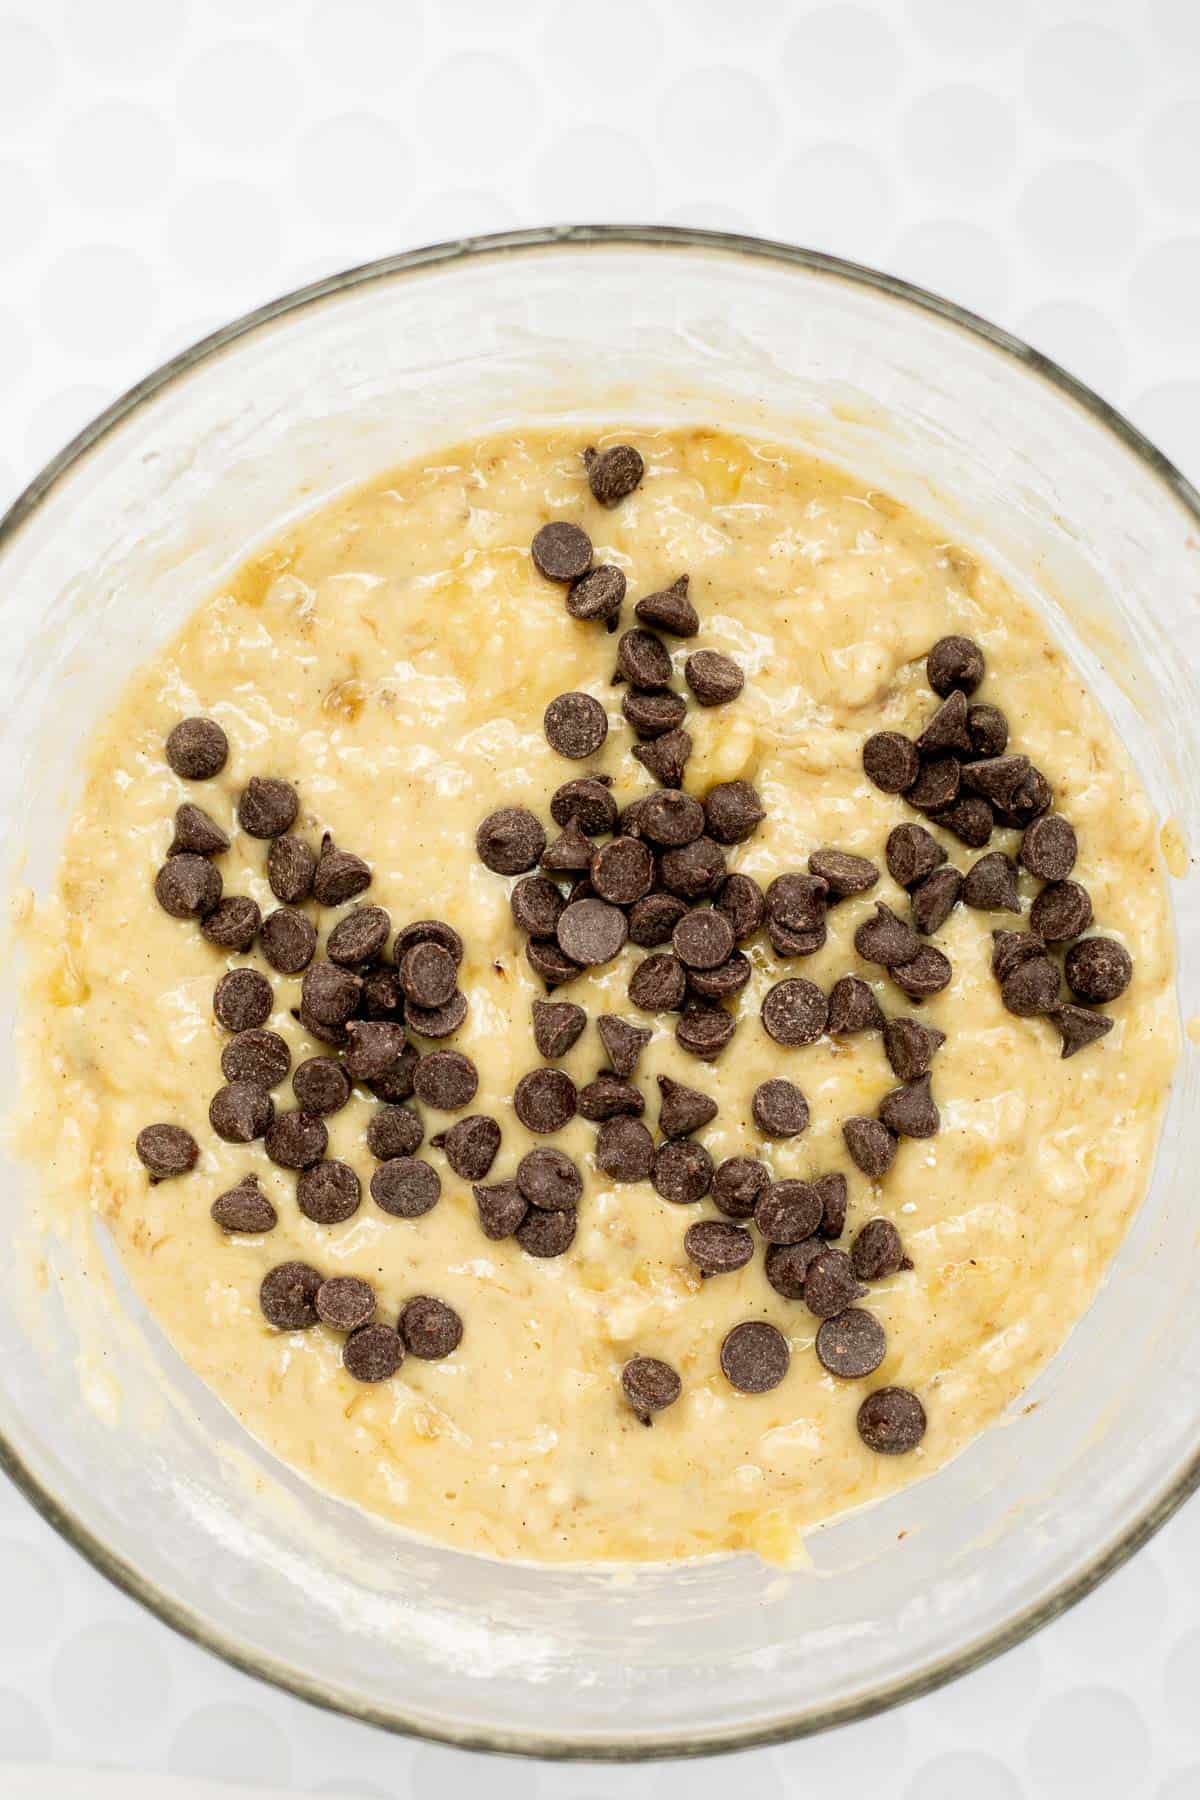 chocolate chips on banana bread batter in a glass bowl.